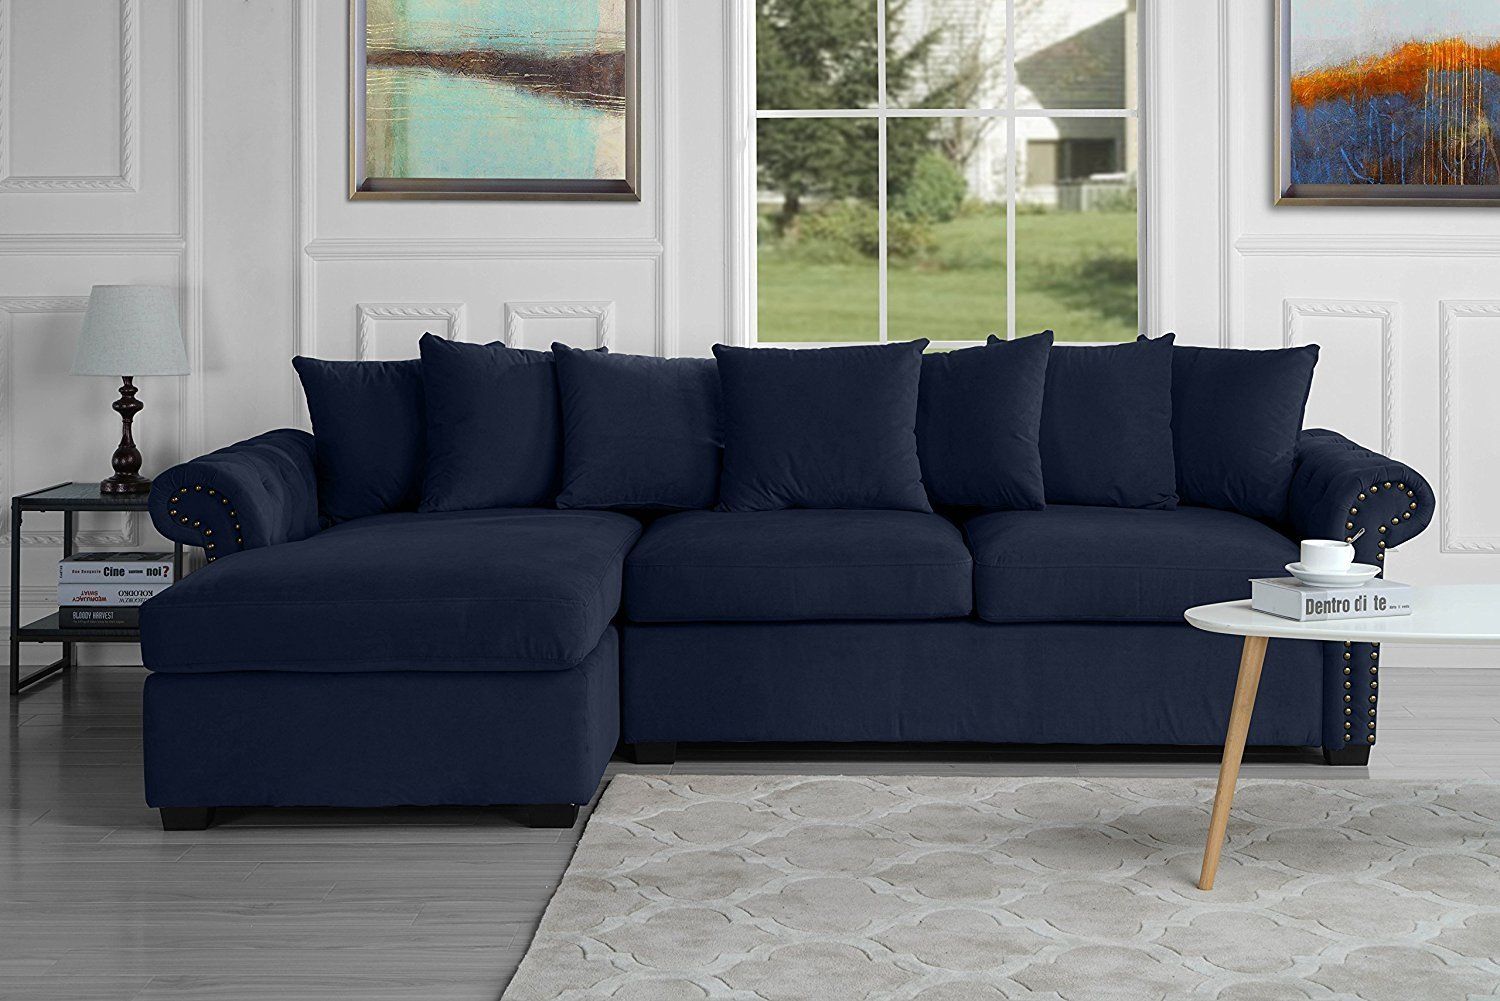 Modern Large Tufted Velvet Sectional Sofa, Scroll Arm L With Regard To Dream Navy 2 Piece Modular Sofas (View 9 of 15)